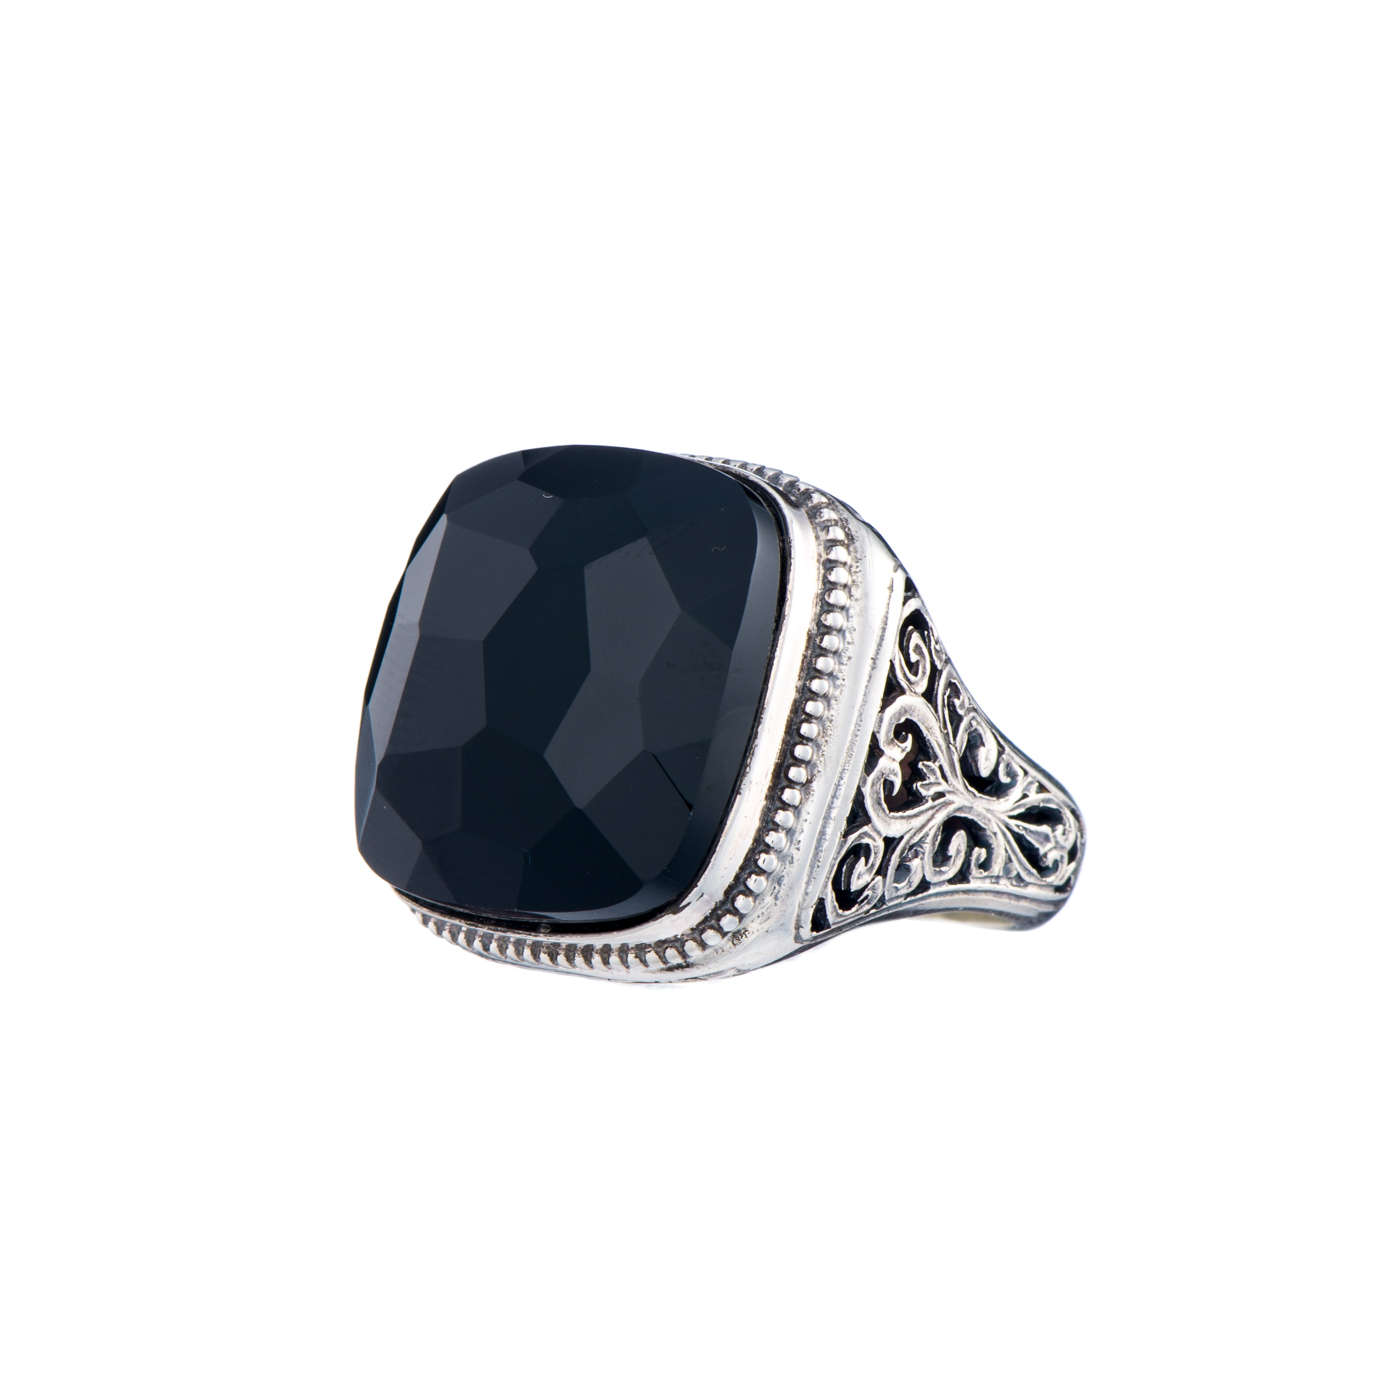 Big square Ring in Sterling Silver with black onyx stone - Gerochristo ...